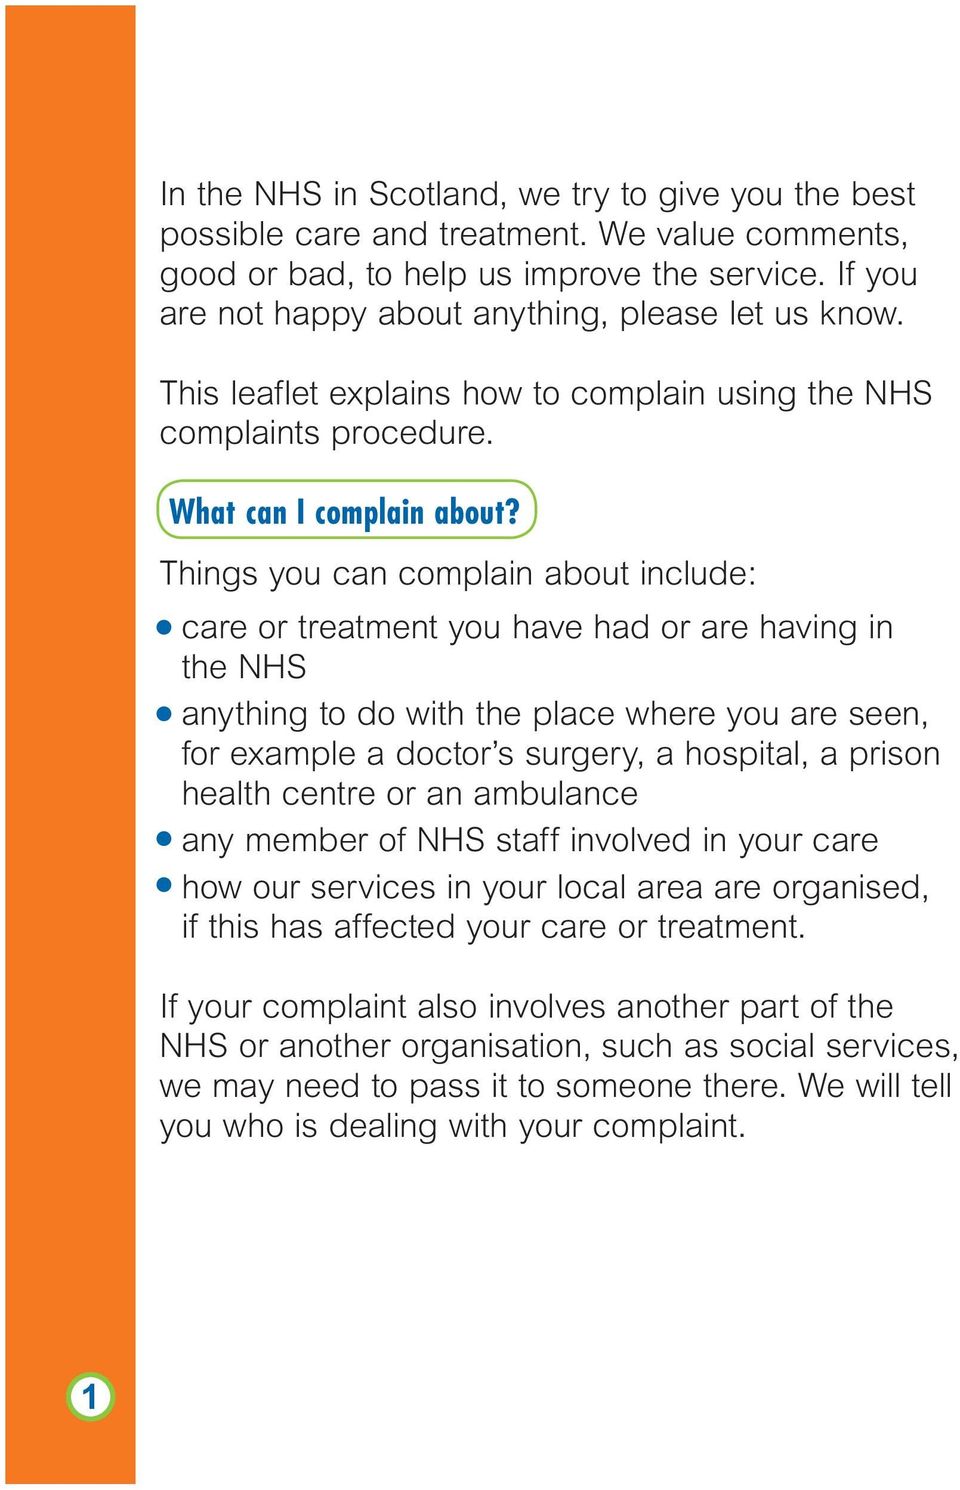 Things you can complain about include: care or treatment you have had or are having in the NHS anything to do with the place where you are seen, for example a doctor s surgery, a hospital, a prison